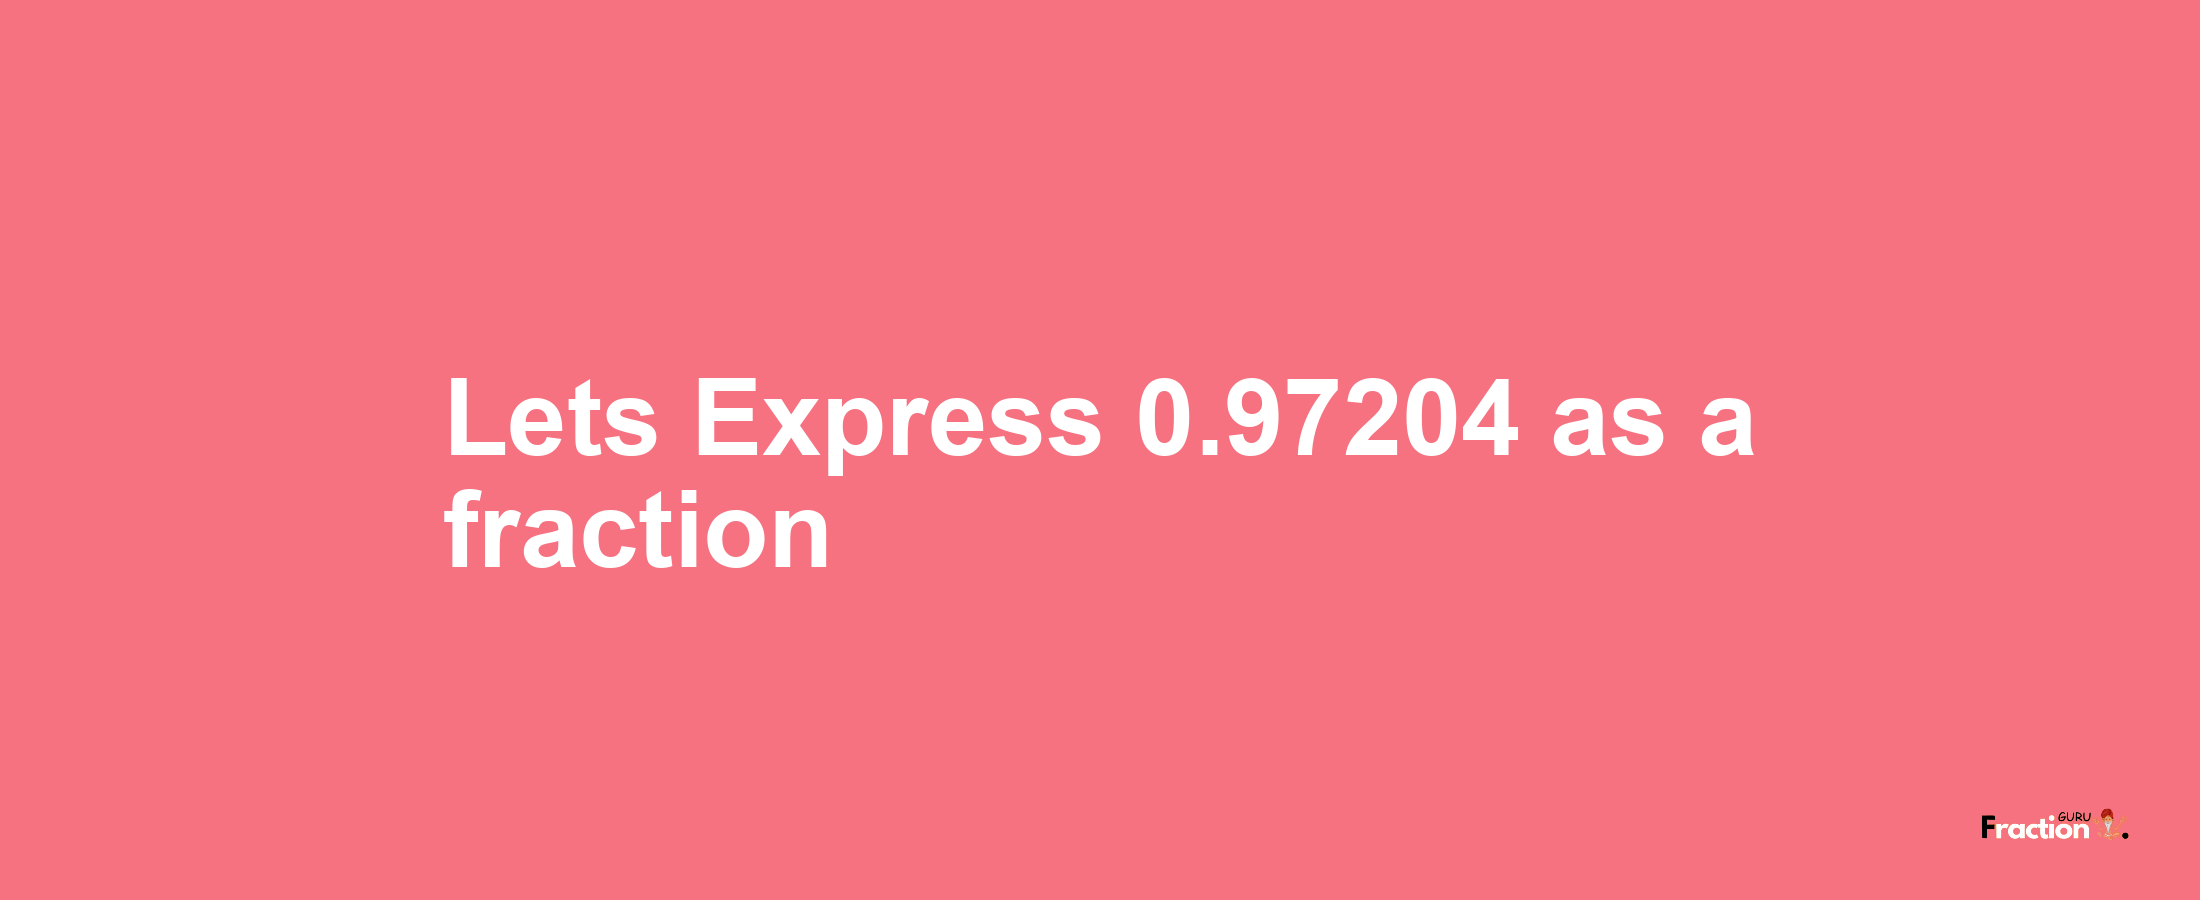 Lets Express 0.97204 as afraction